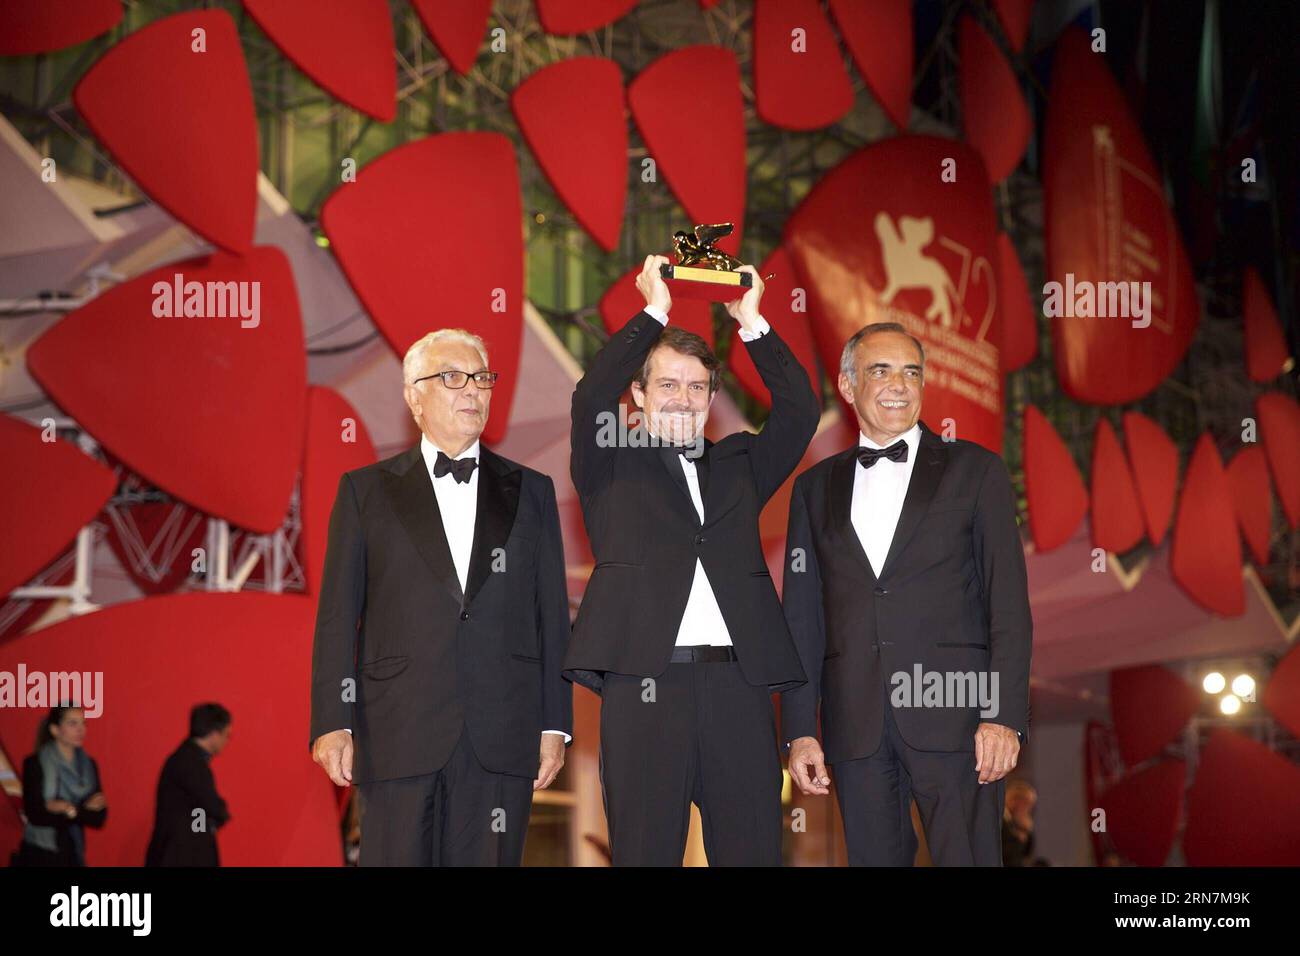 (150912) -- VENICE, Sept. 12, 2015 -- Venezuelan director Lorenzo Vigas (C) poses with Venice Film Festival President Paolo Baratta (L) and director of the 72nd Venice Film Festival Alberto Barbera after he wins the Golden Lion prize for his movie Desde Alla (From Afar), during the award ceremony at the 72nd Venice Film Festival, at the Lido of Venice, Italy, Sept. 12, 2015. The Venezuelan film won the Golden Lion for Best Film, the highest prize awarded at the 72nd Venice International Film Festival which closed here at the Lido of Venice on Saturday. ) ITALY-VENICE-FILM-FESTIVAL-72ND-AWARD-G Stock Photo